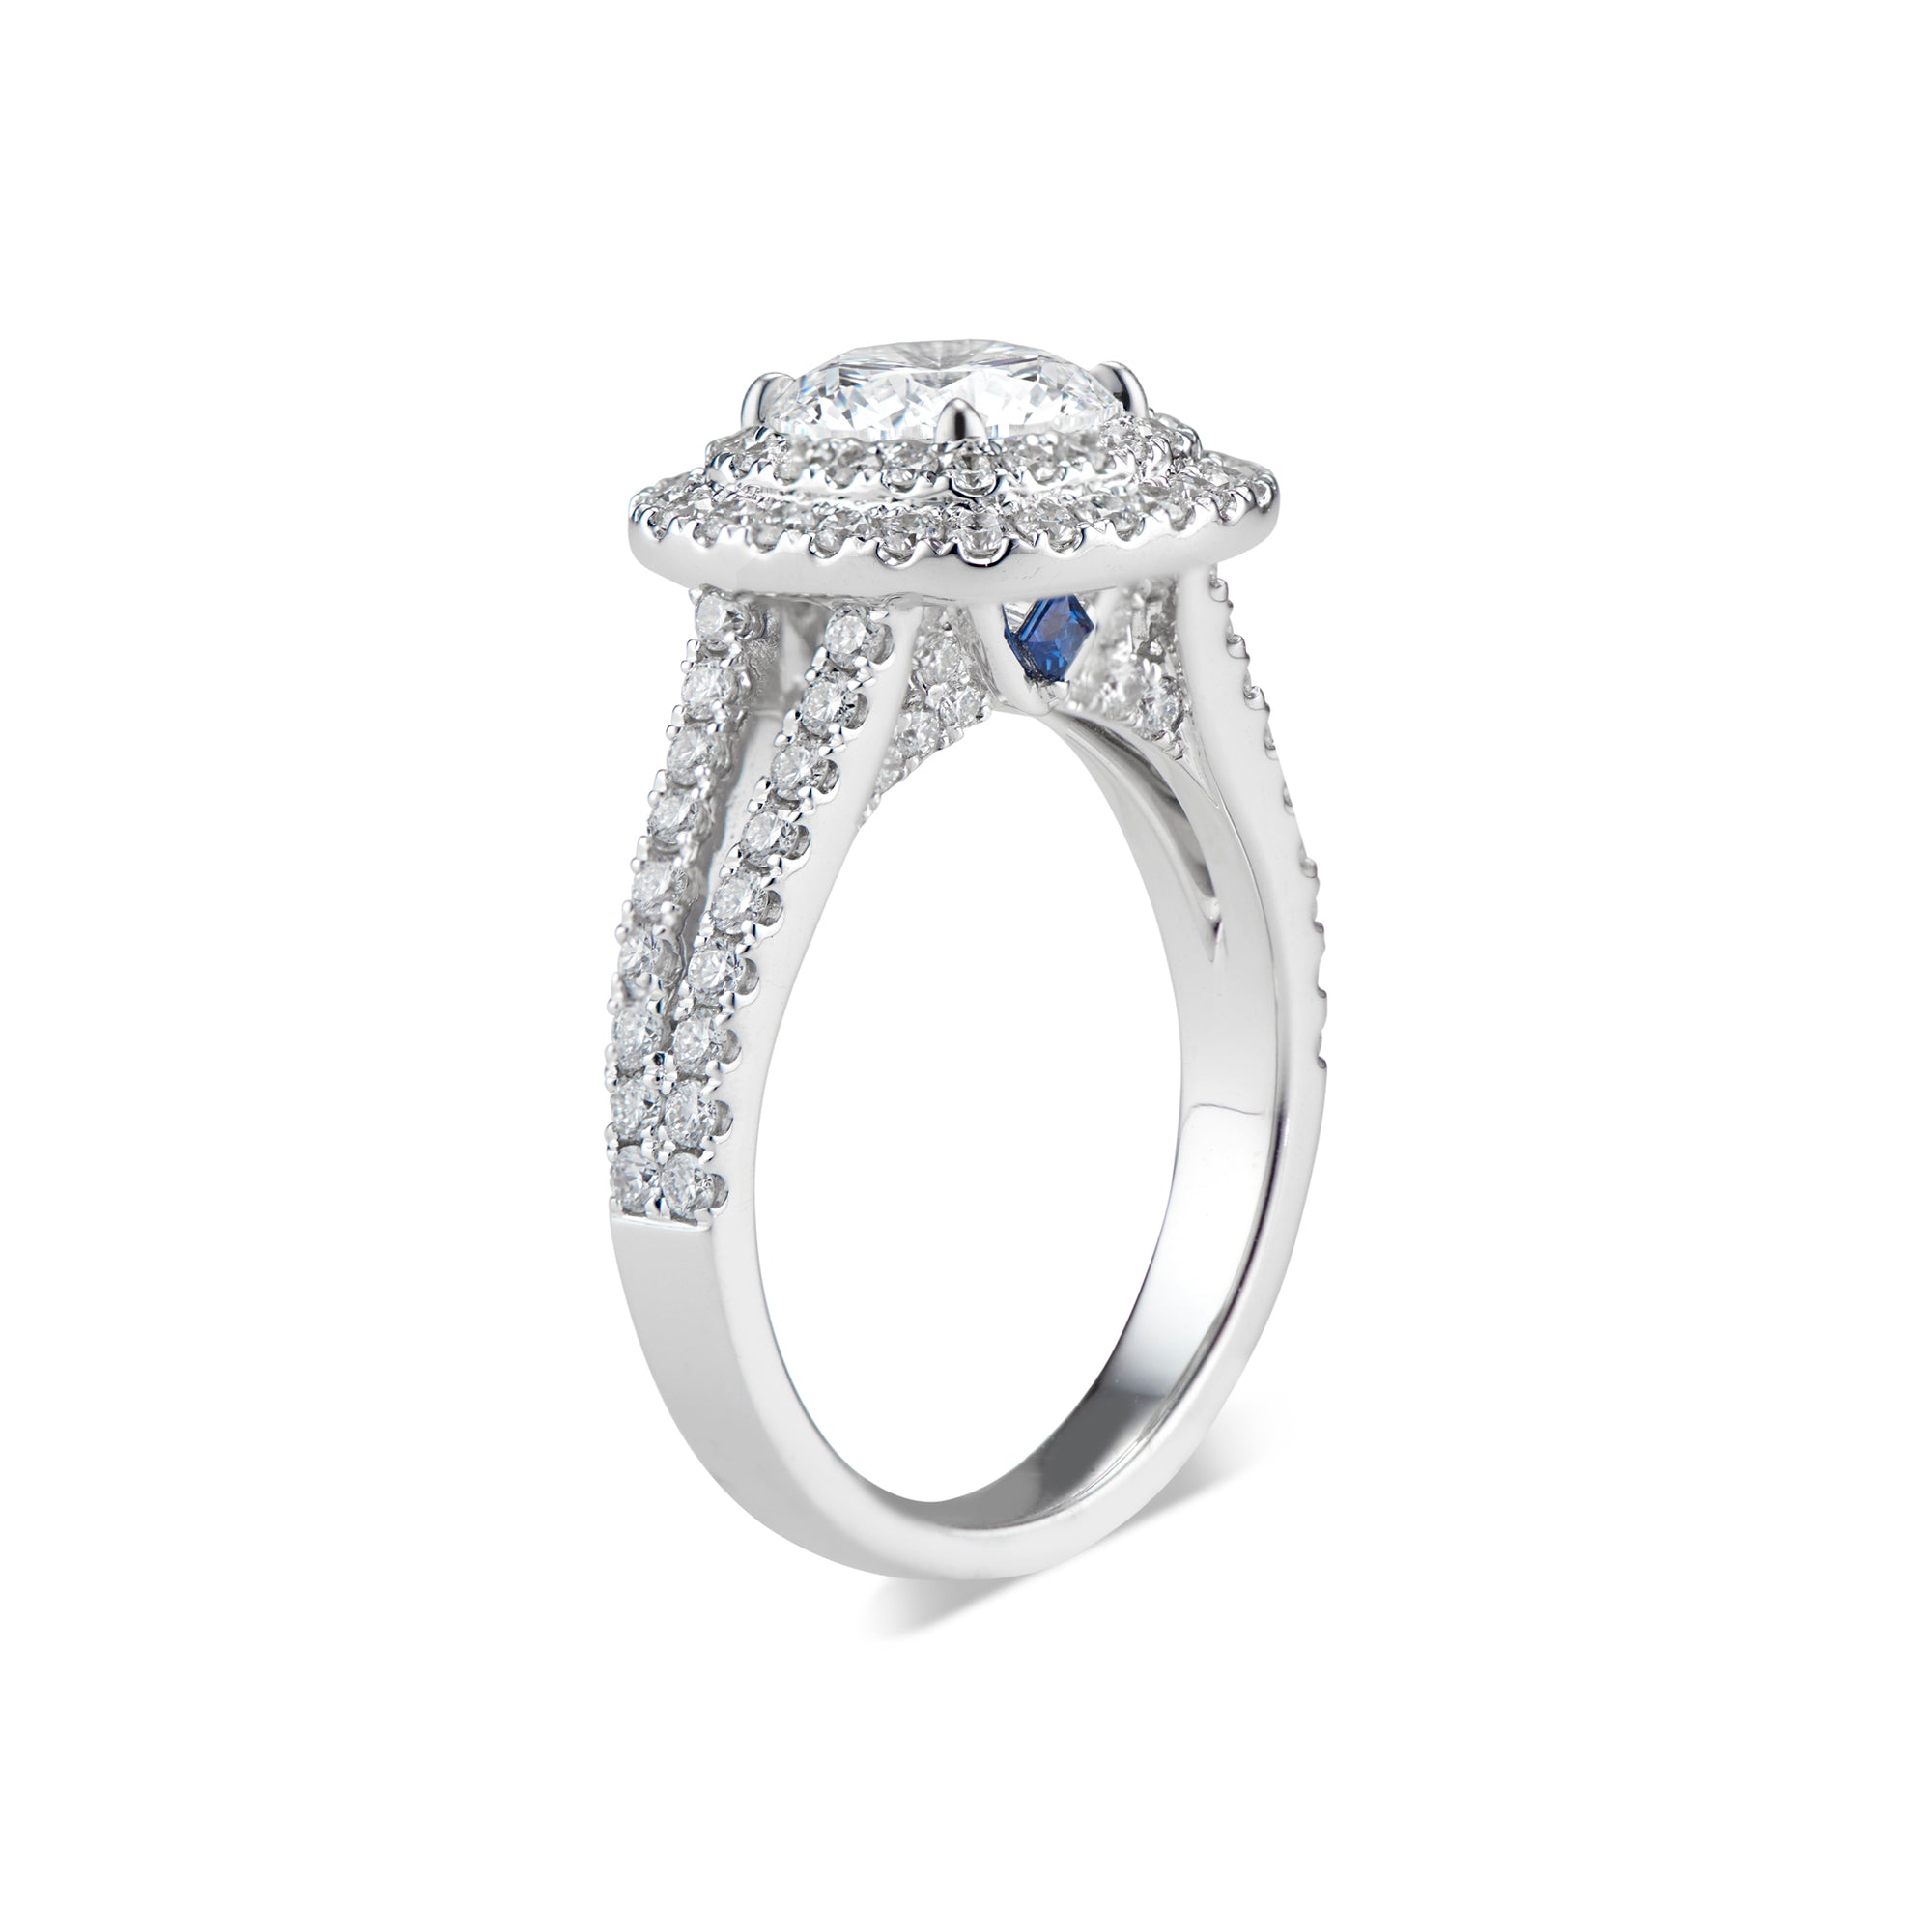 Cushion Double Halo Diamond Engagement Ring with Split Shank & Sapphire Accent Stones  -18K weighing 6.20GR  - 100 round diamonds totaling 1.01 carats  - 2 princess-cut sapphires totaling 0.08 carats